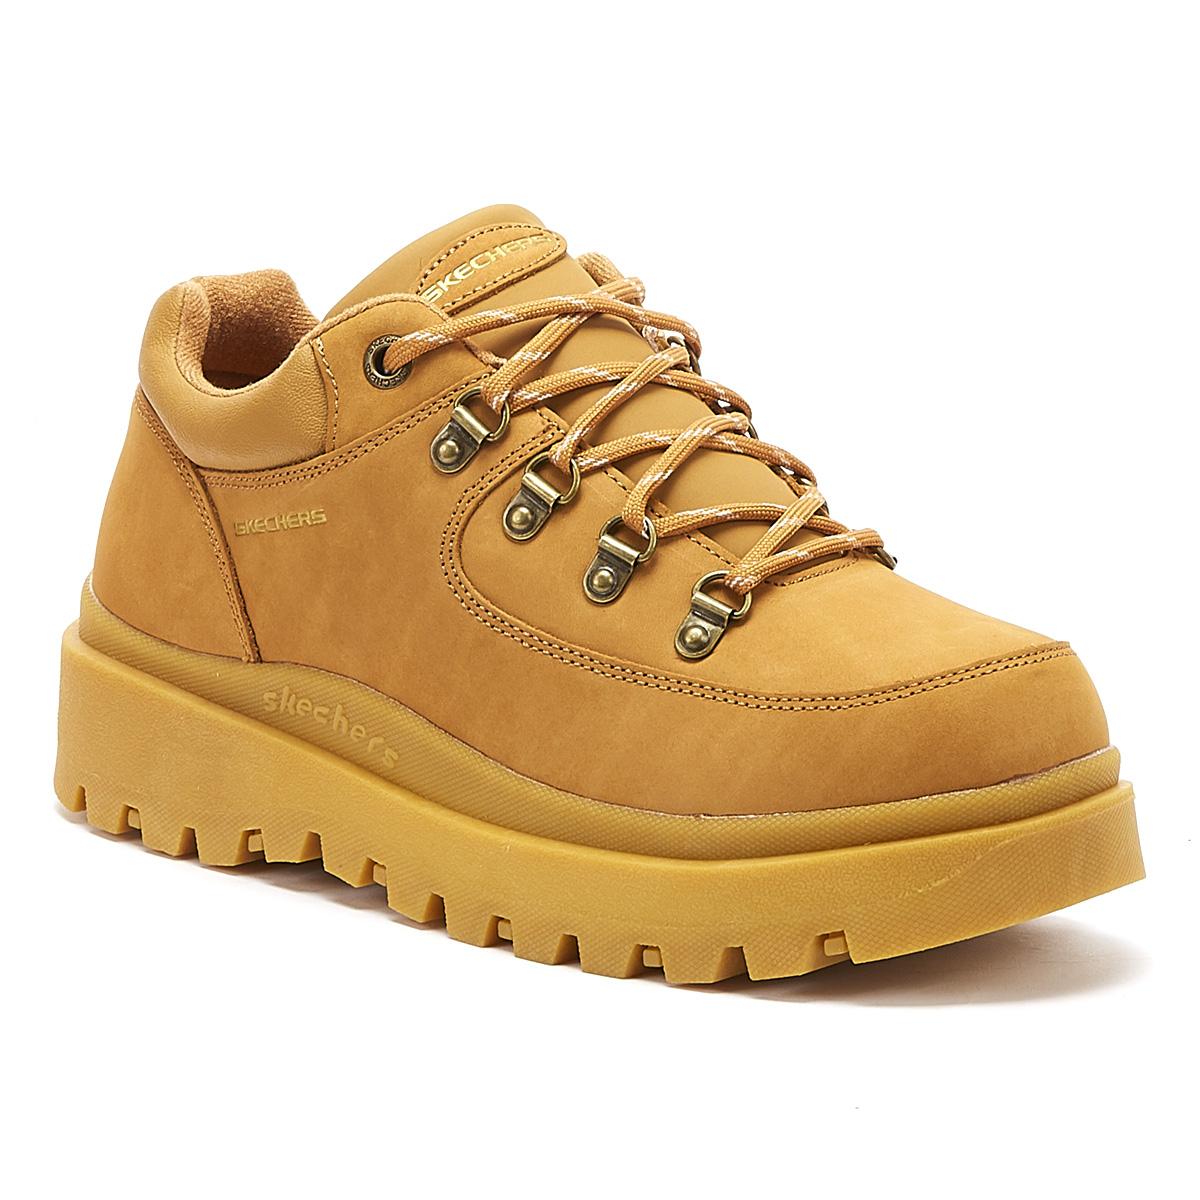 Eller Cusco Nordamerika Skechers Rubber Shindigs Cool Out Womens Wheat Yellow Trainers - Lyst